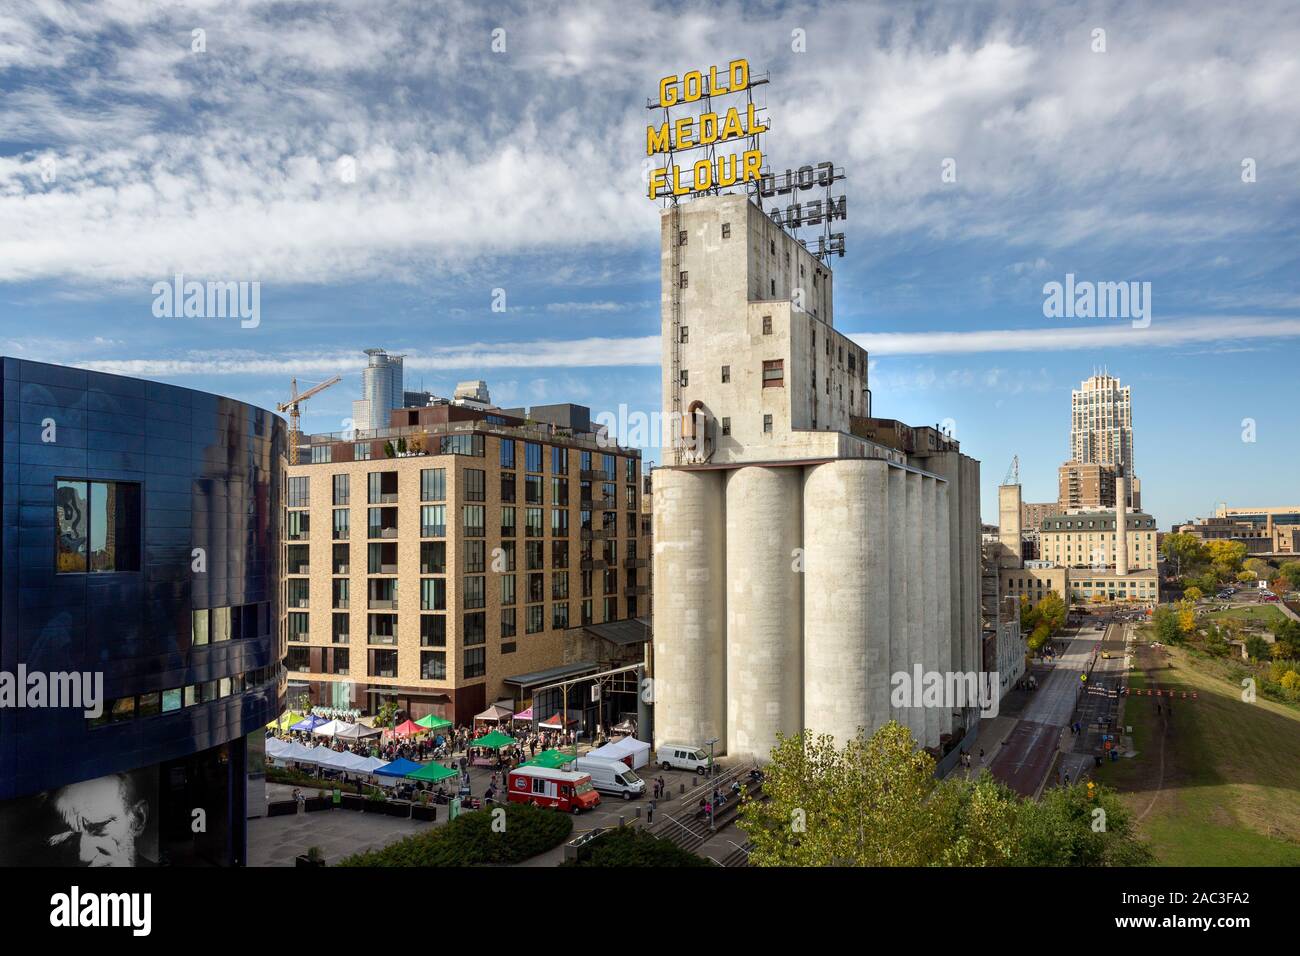 Gold Medal Flour sign and grain elevators which are part of historic Mill City Museum in downtown Minneapolis, Minnesota Stock Photo